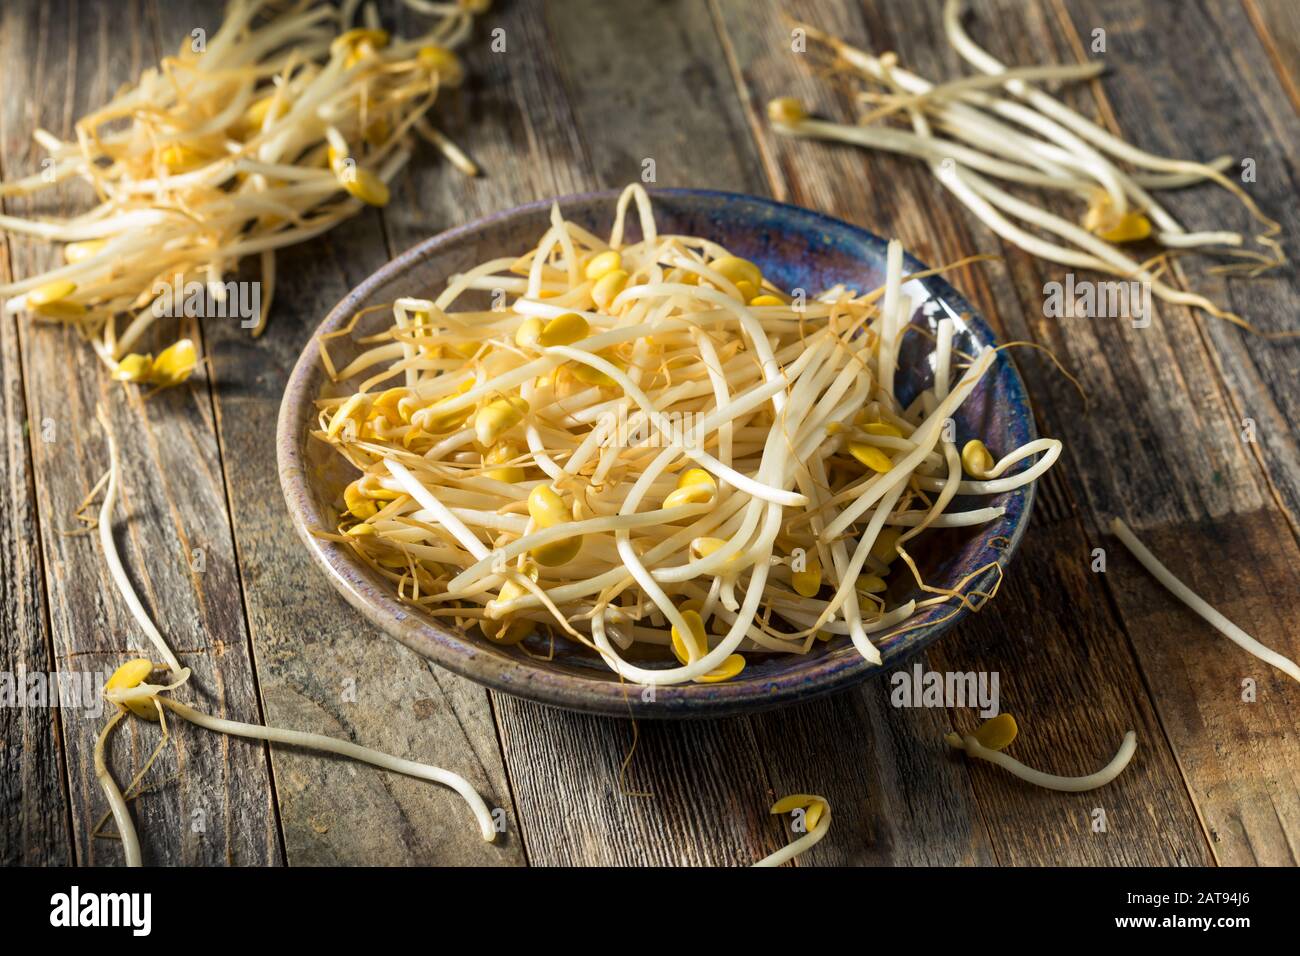 Raw White Organic Bean Sprouts in a Bowl Stock Photo